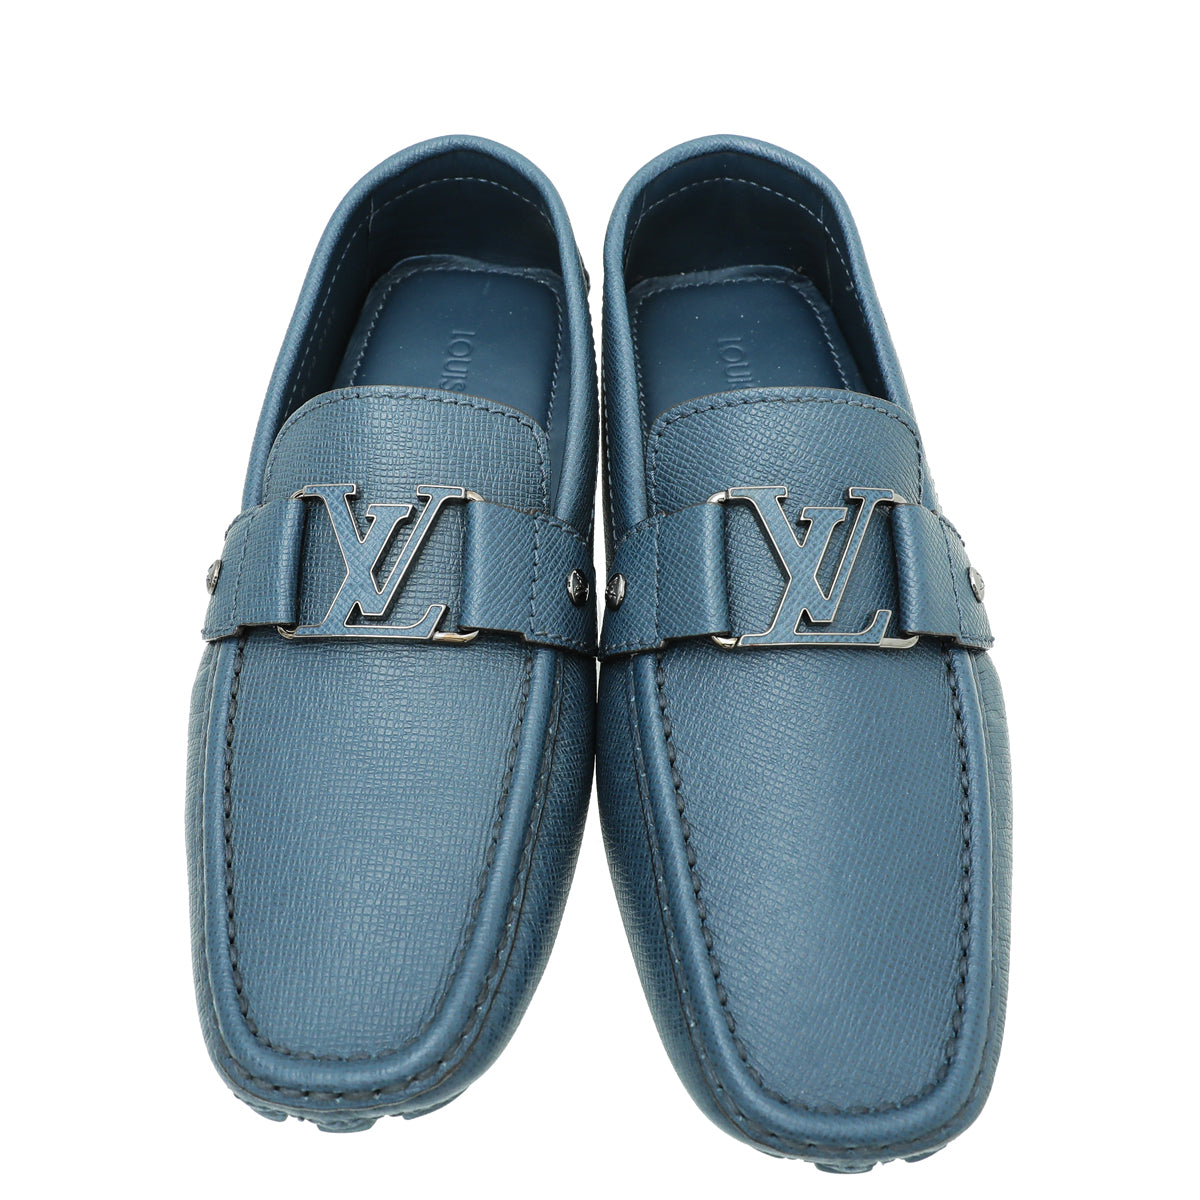 Louis Vuitton Navy Blue Monte Carlo Leather Moccasin 7